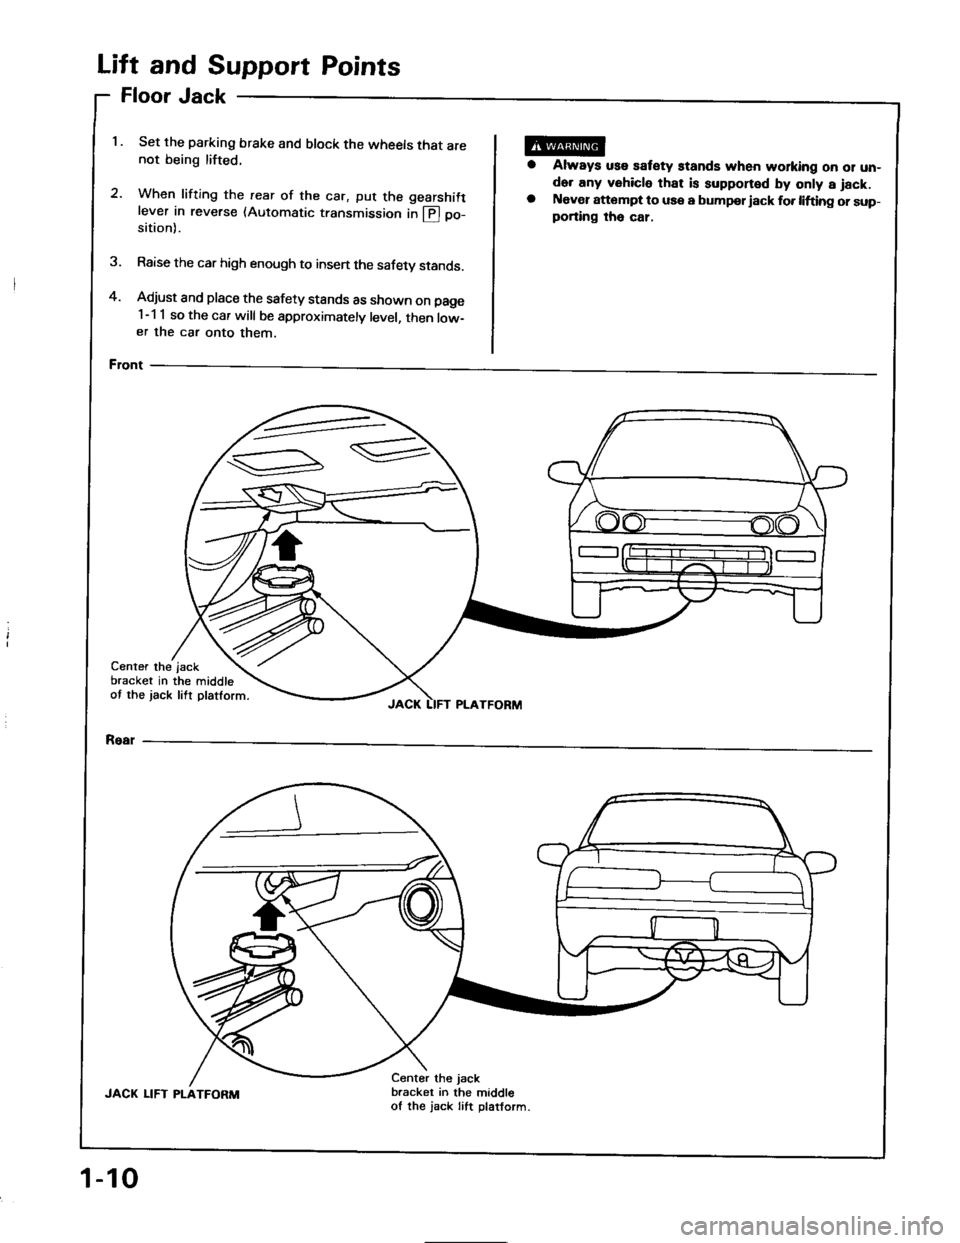 ACURA INTEGRA 1994  Service Repair Manual and Support Points
Jack
Set the parking brake and block the wheels that are
not being lifted.
2.When lifting the rearwhen tritrng the rear of the car, put the gearshift
lever in reverse (Automatic tra